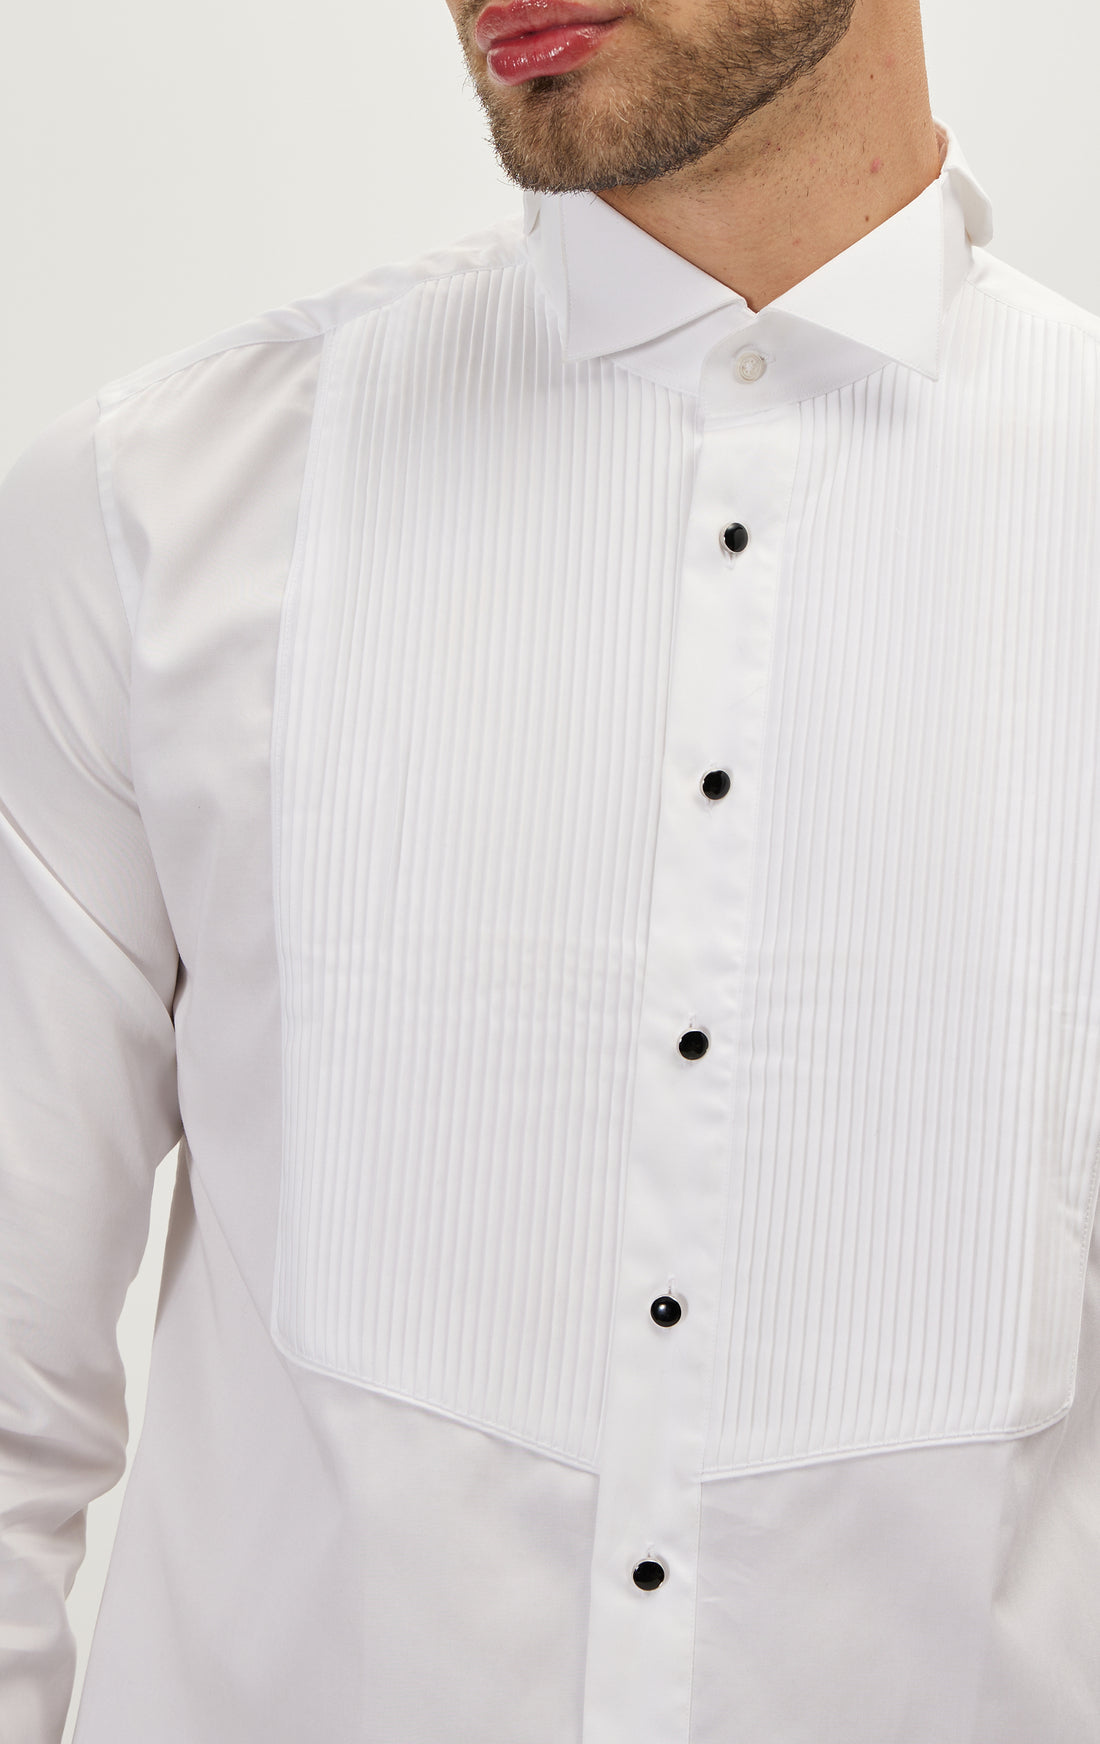 N° 4686 PURE COTTON PLEATED WING TIP COLLAR SHIRT - WHITE WHITE